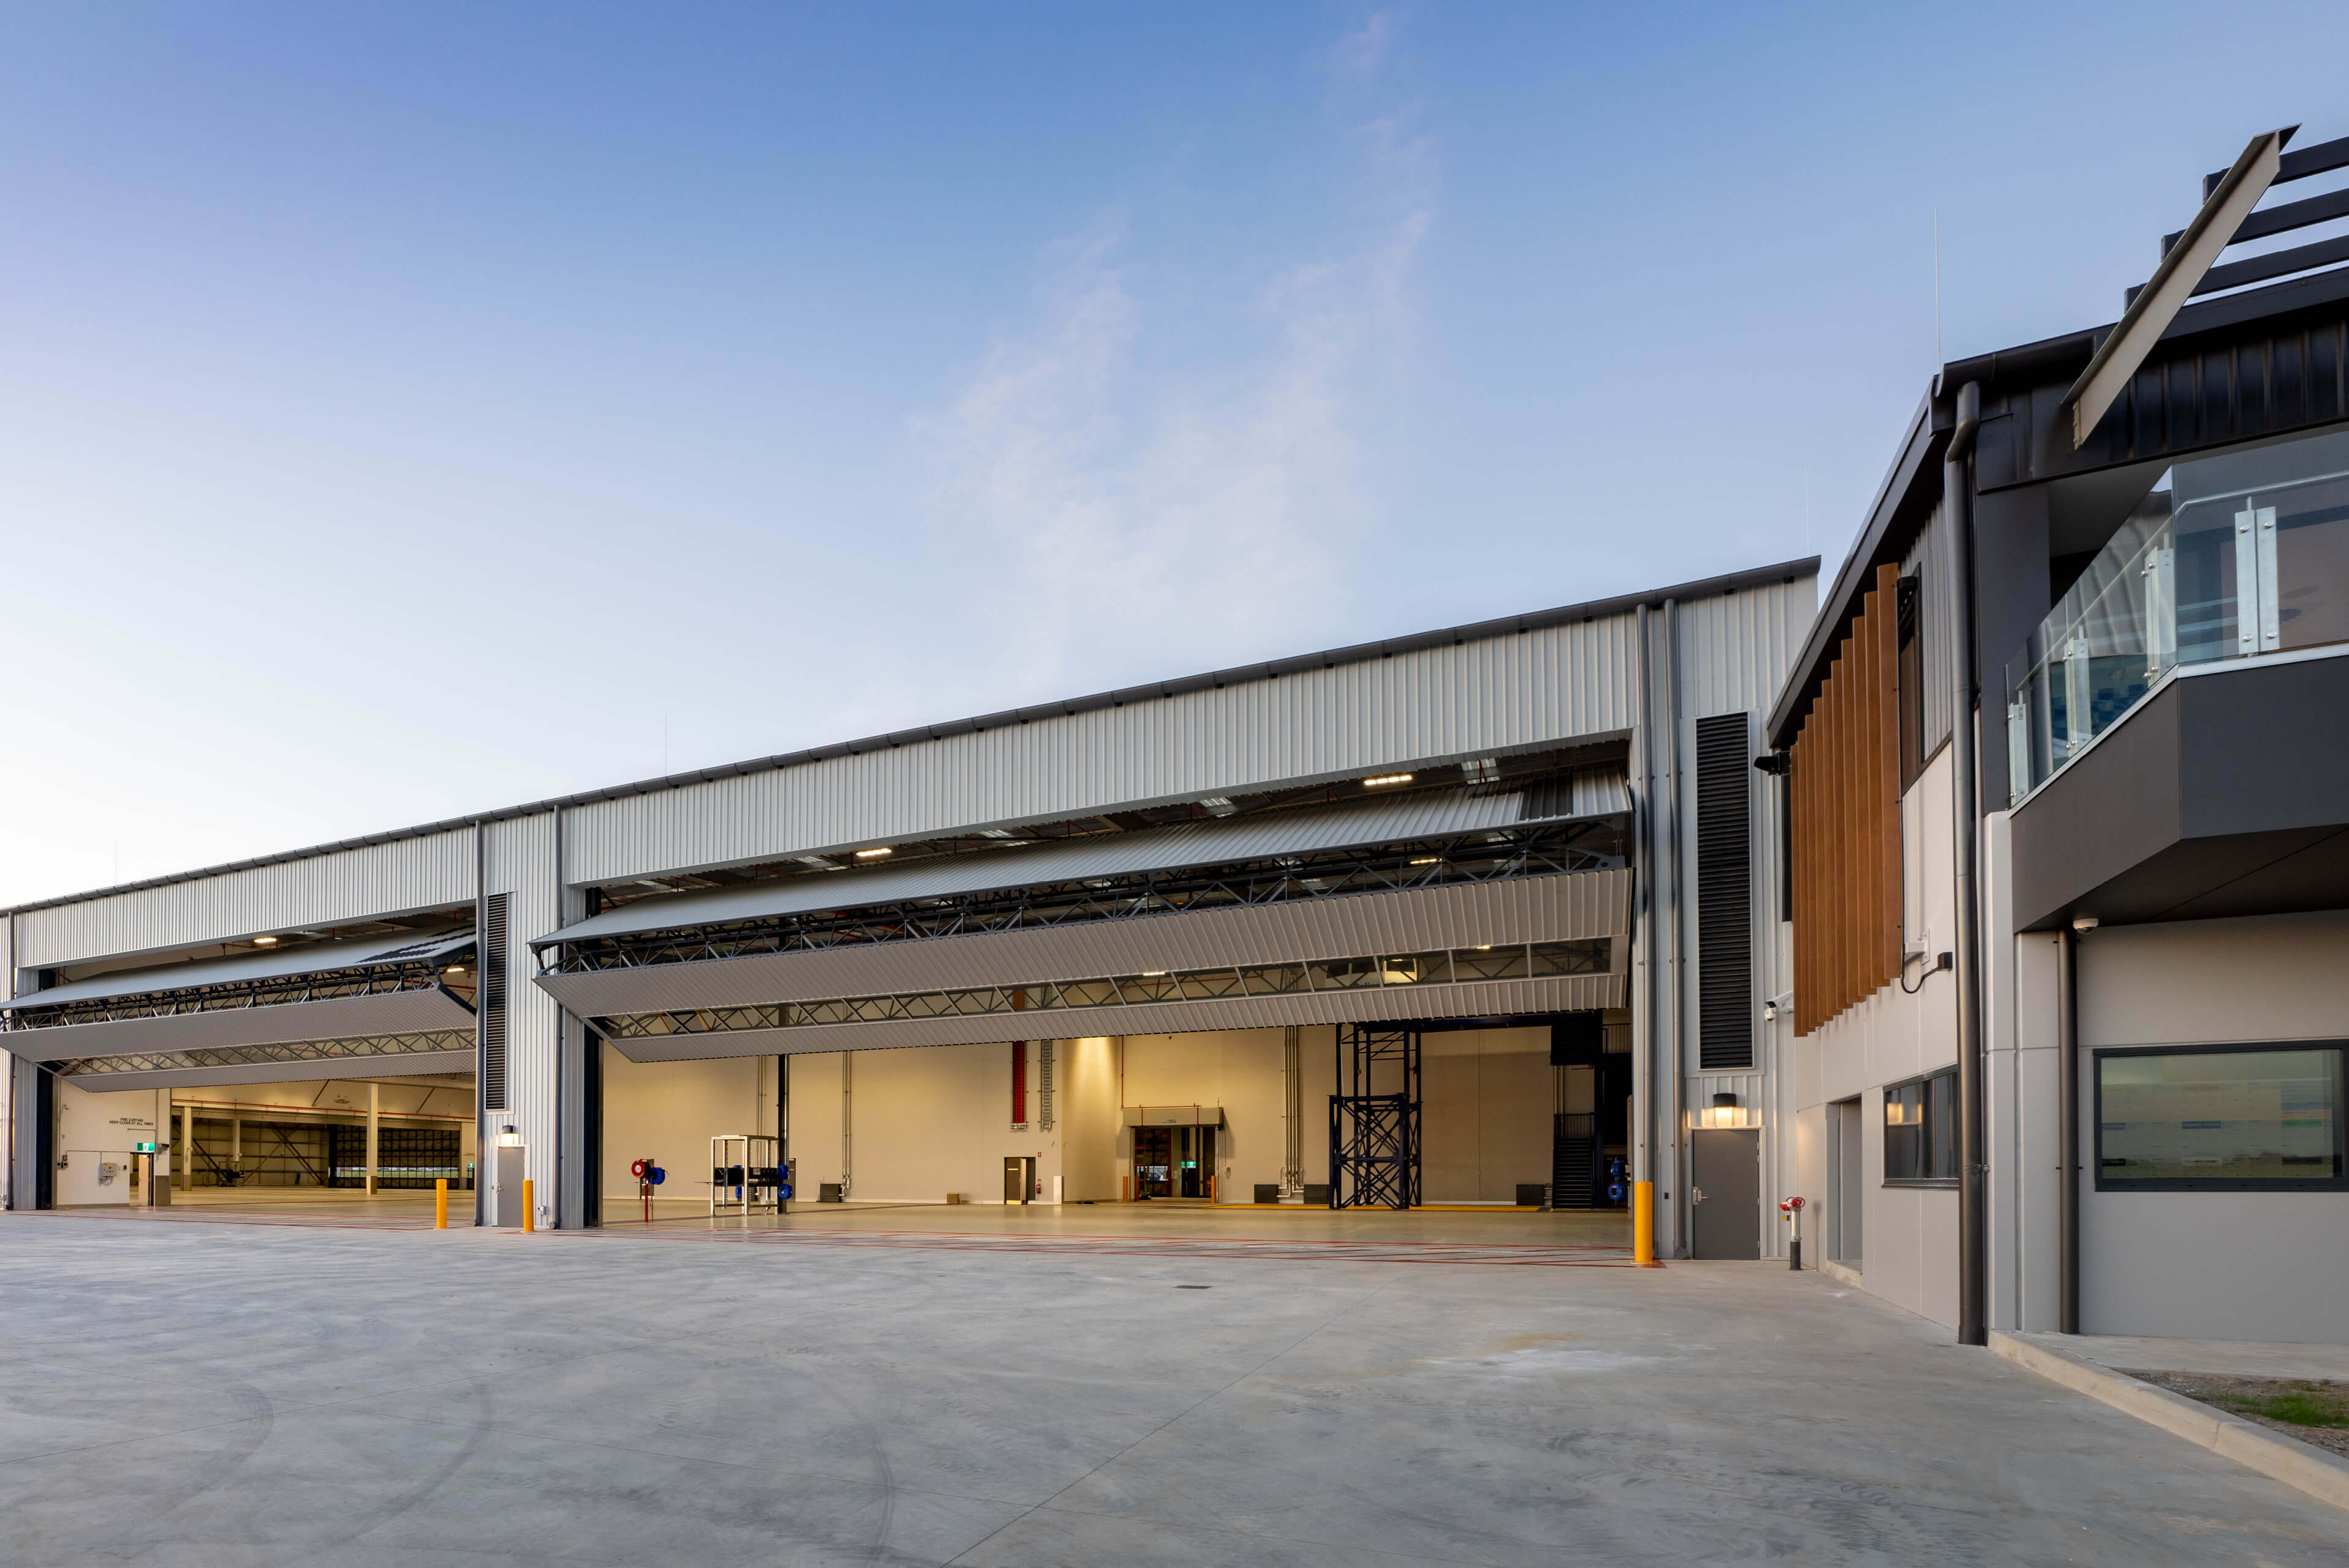 2 10 hangar bays for helicopter and fixed wing operation at polair facility bankstown taylor construction refurbishment and live environments